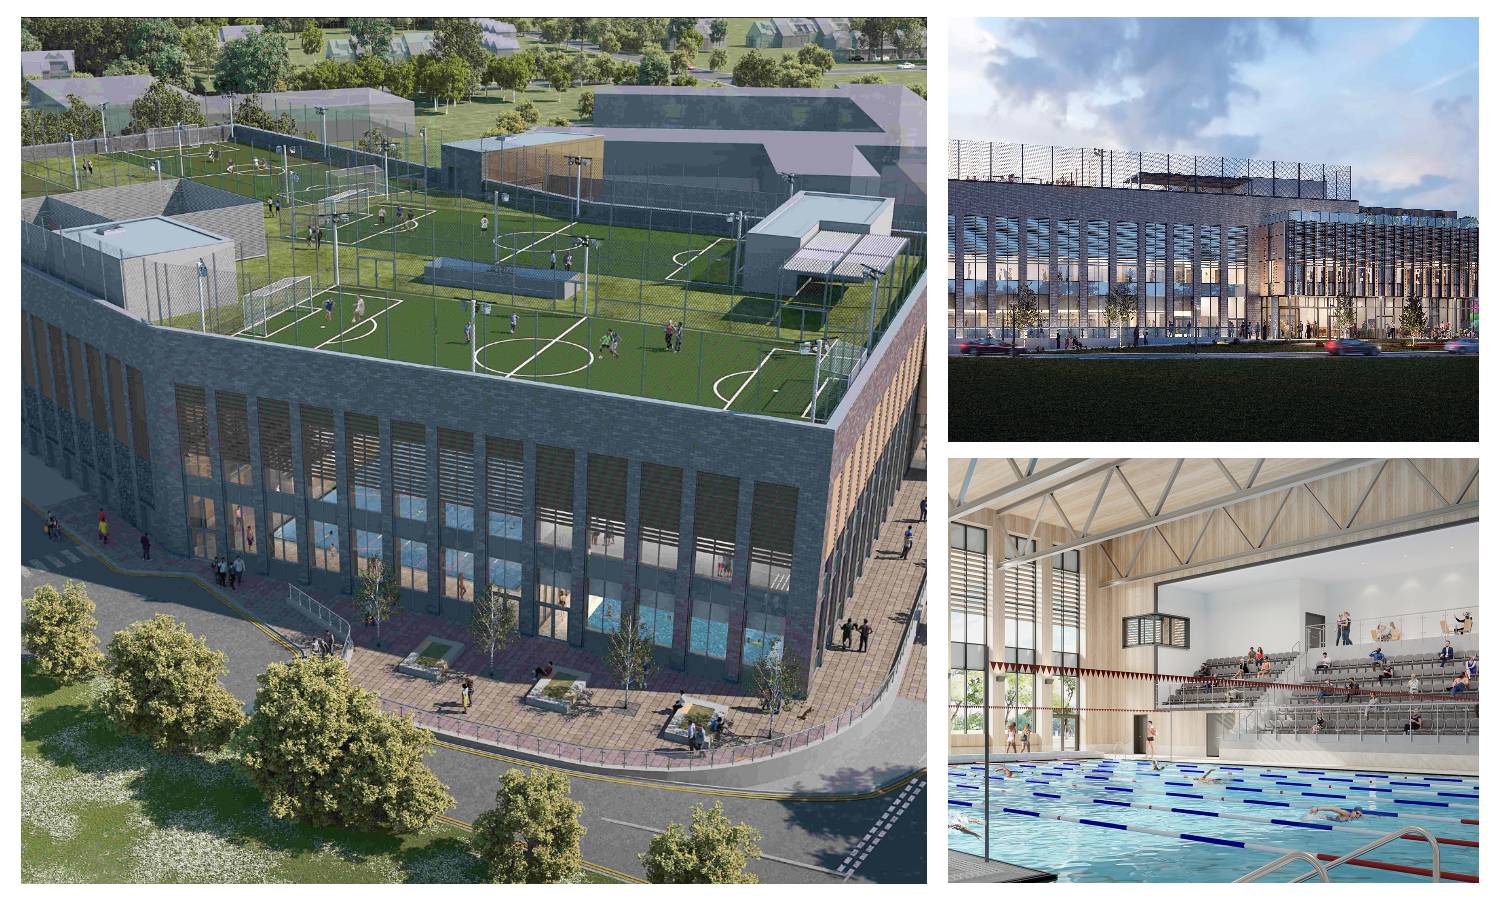 Ground-breaking eco-friendly leisure facility plans approved